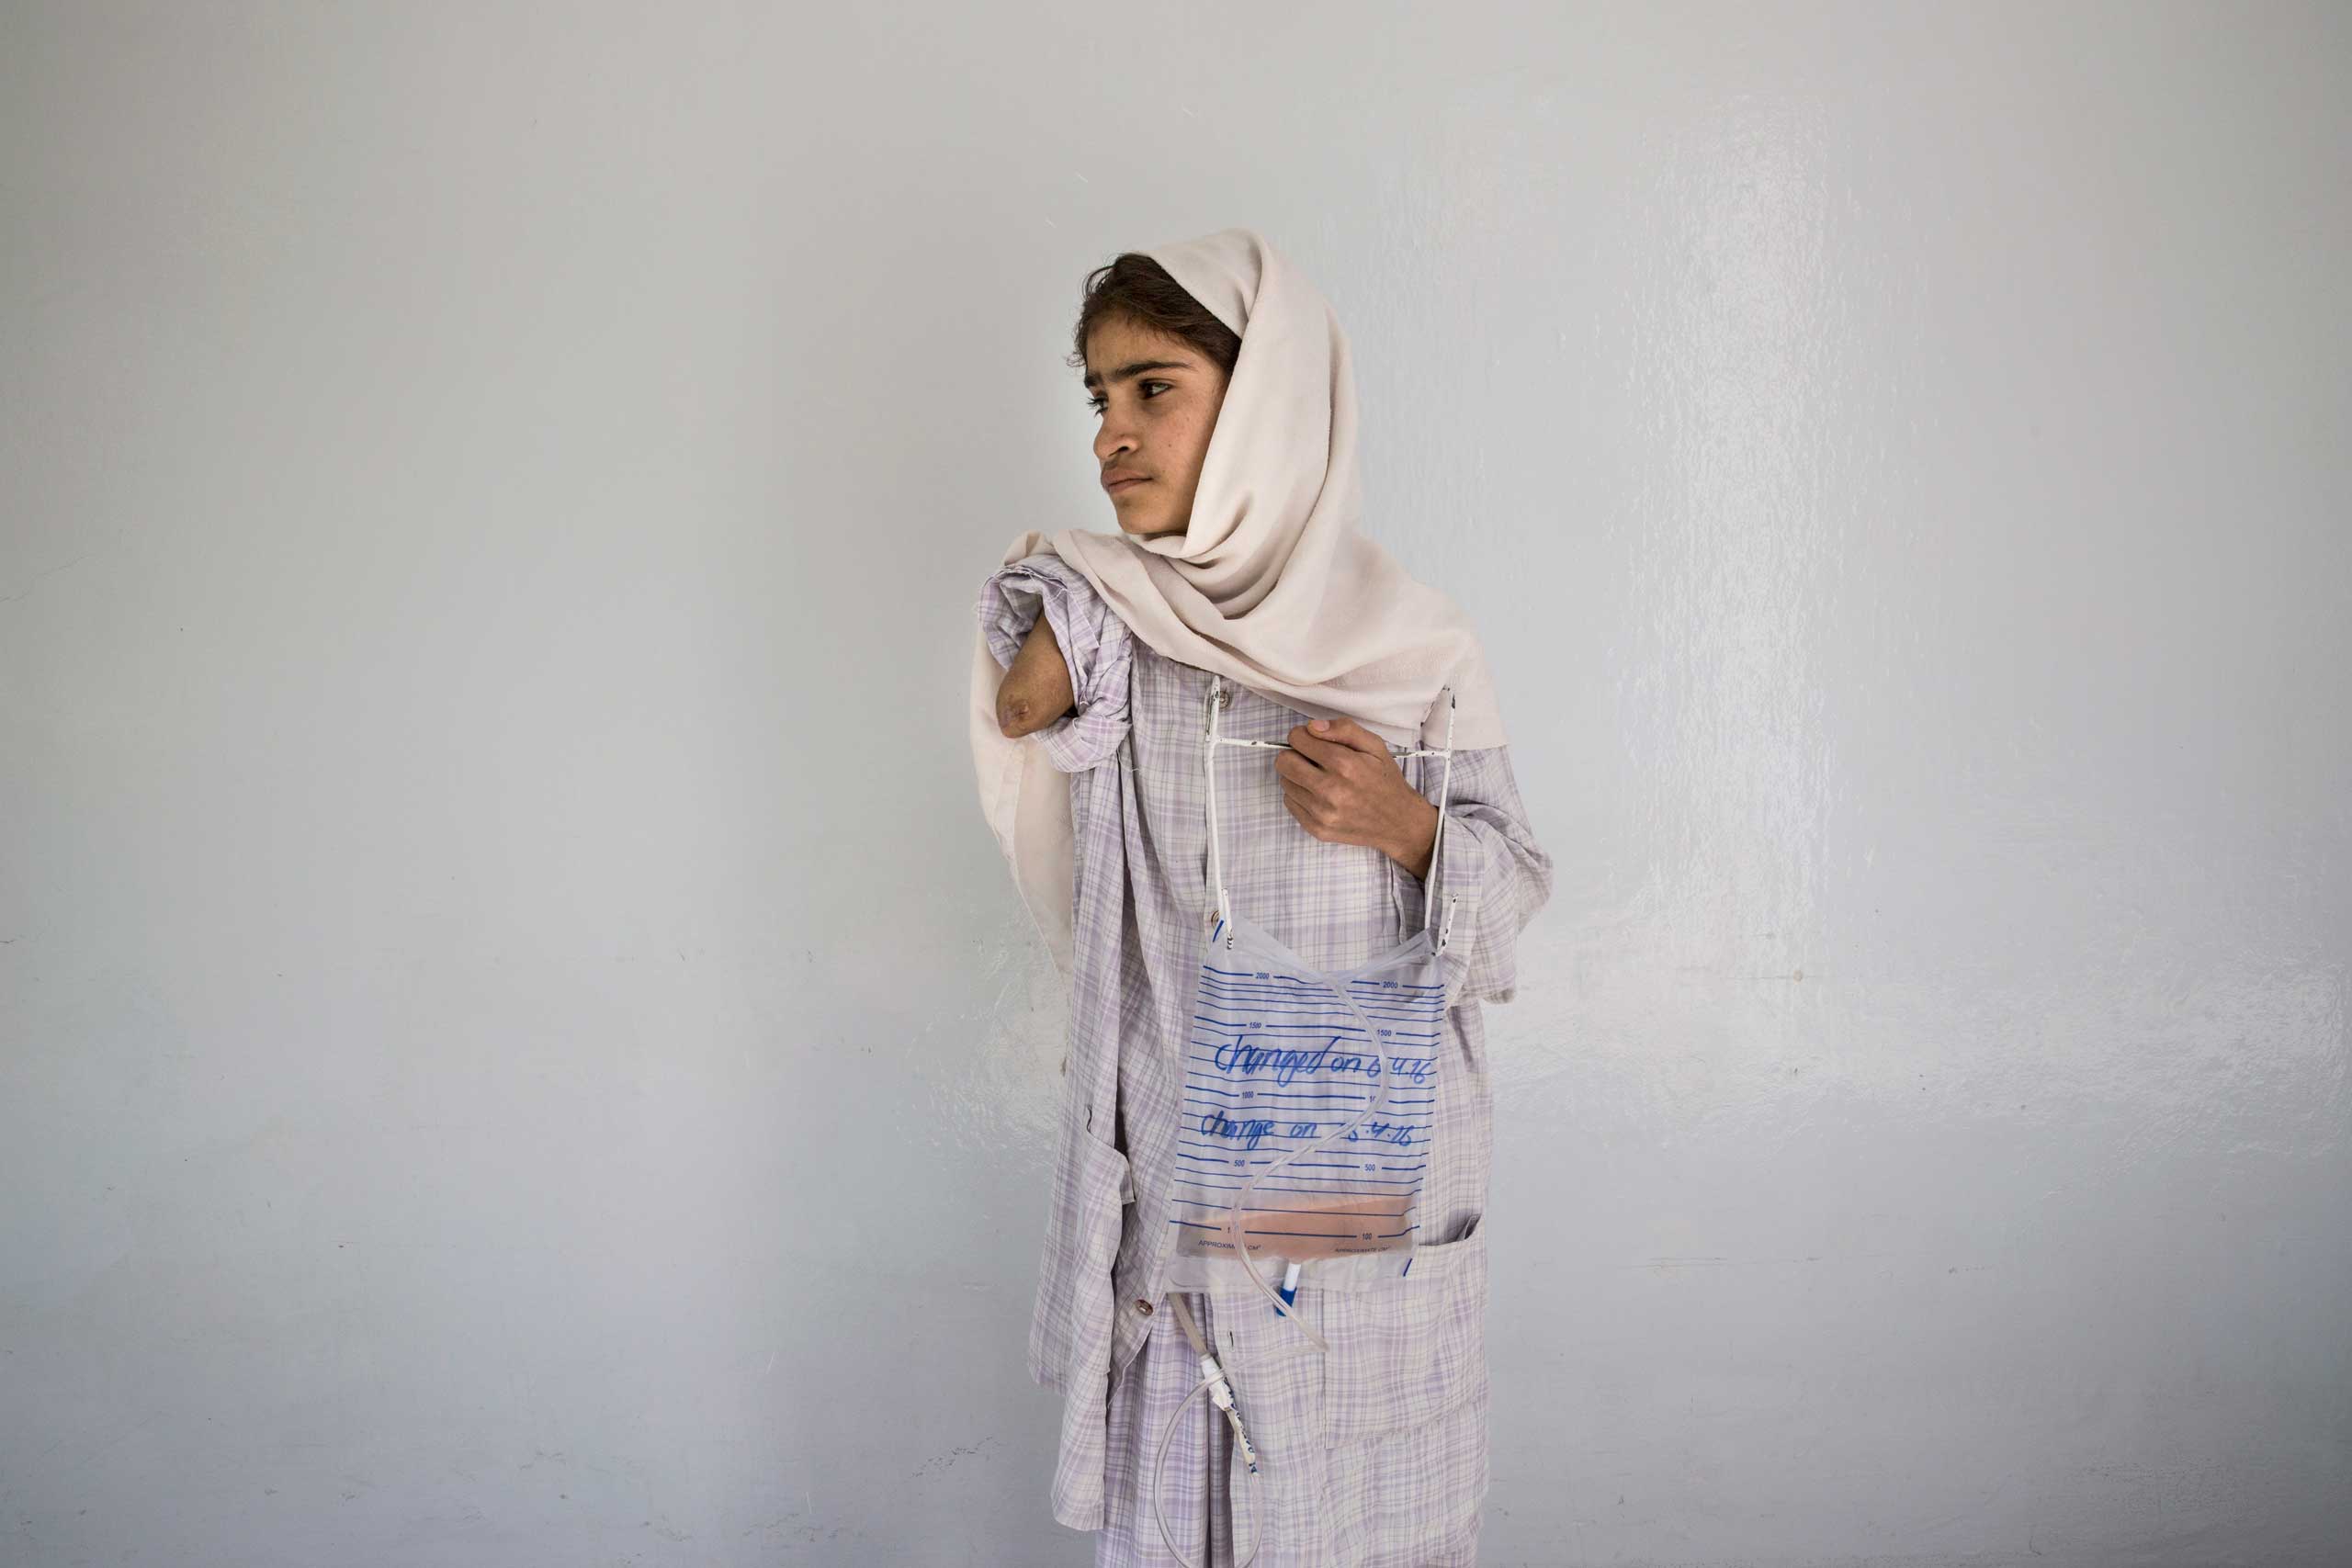 Madina, 12, lost her arm, when a rocket hit her home in Paktia, Kabul on April 6, 2016. She is recovering from an operation from complications with her pancreas at the Emergency hospital.